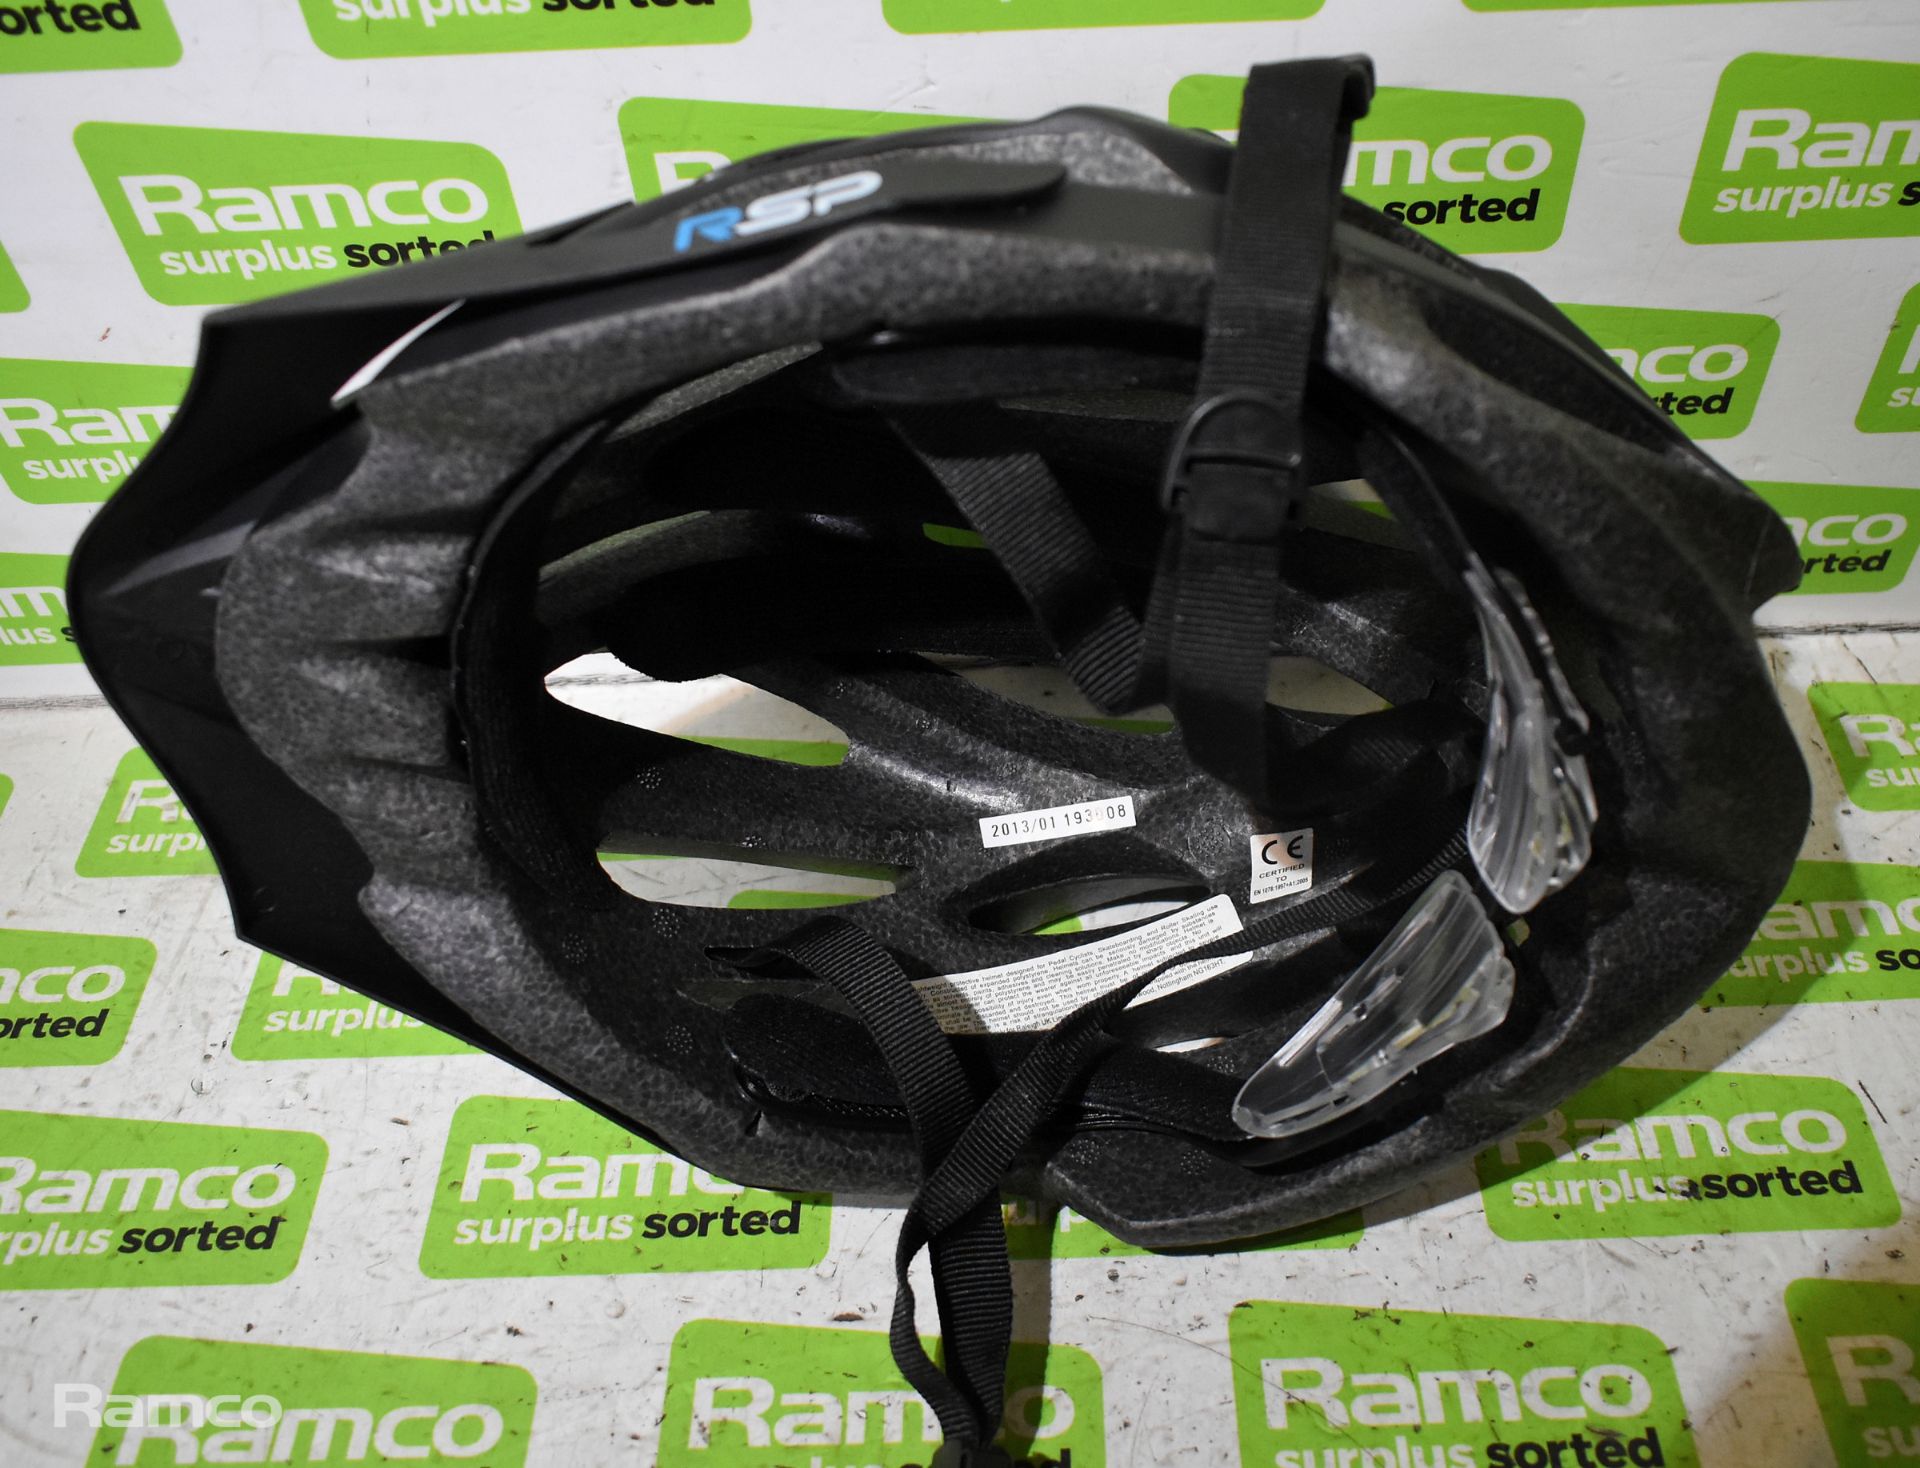 6x Raleigh Extreme cycle helmets - size 58-61cm, 2x RSP Extreme cycle helmets - size 58-61cm - Image 2 of 4